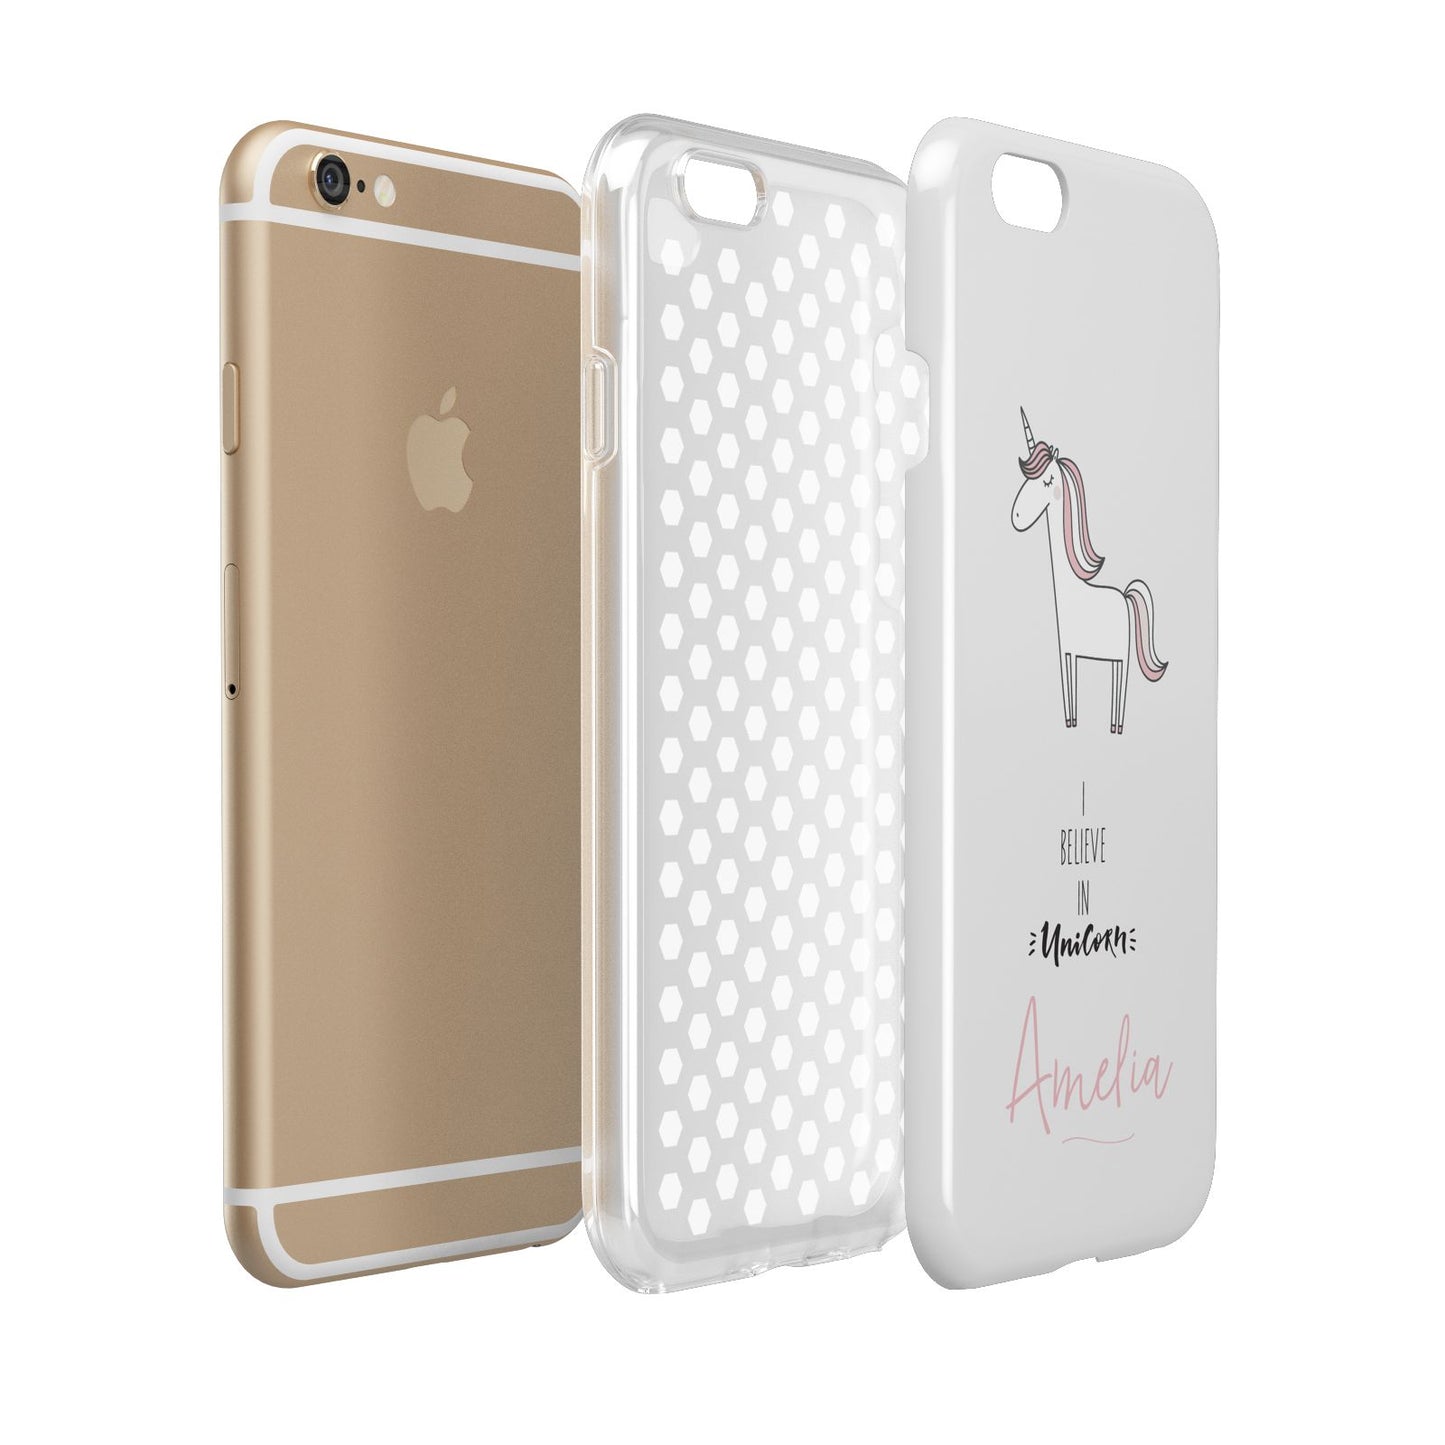 I Believe in Unicorn Apple iPhone 6 3D Tough Case Expanded view